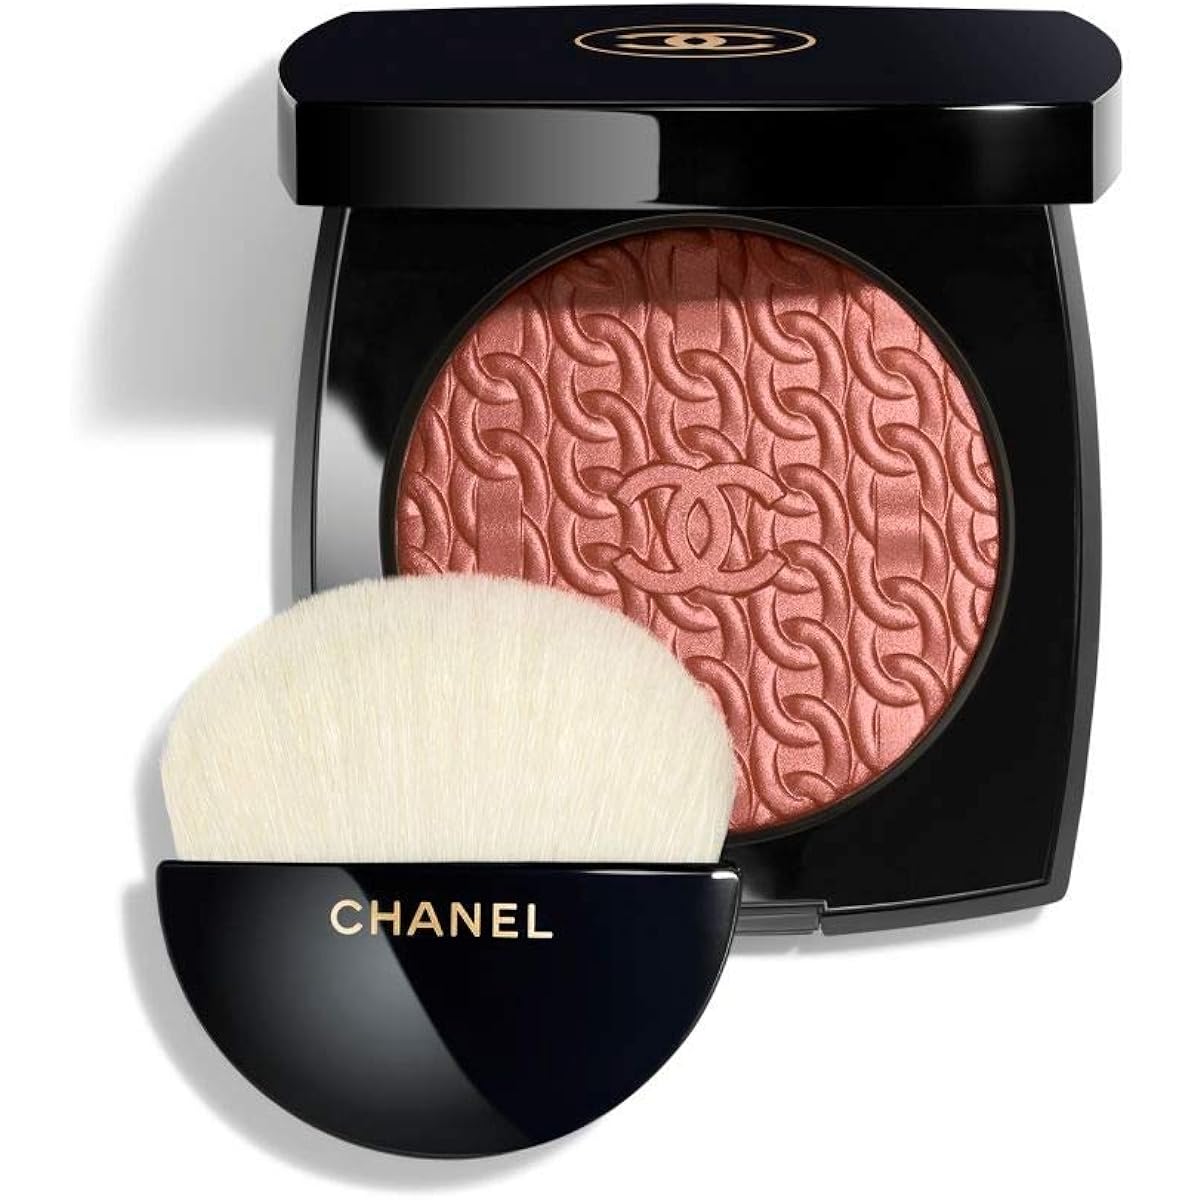 CHANEL Les Chenes de CHANEL Face Powder [Special Limited Edition] -CHANEL-